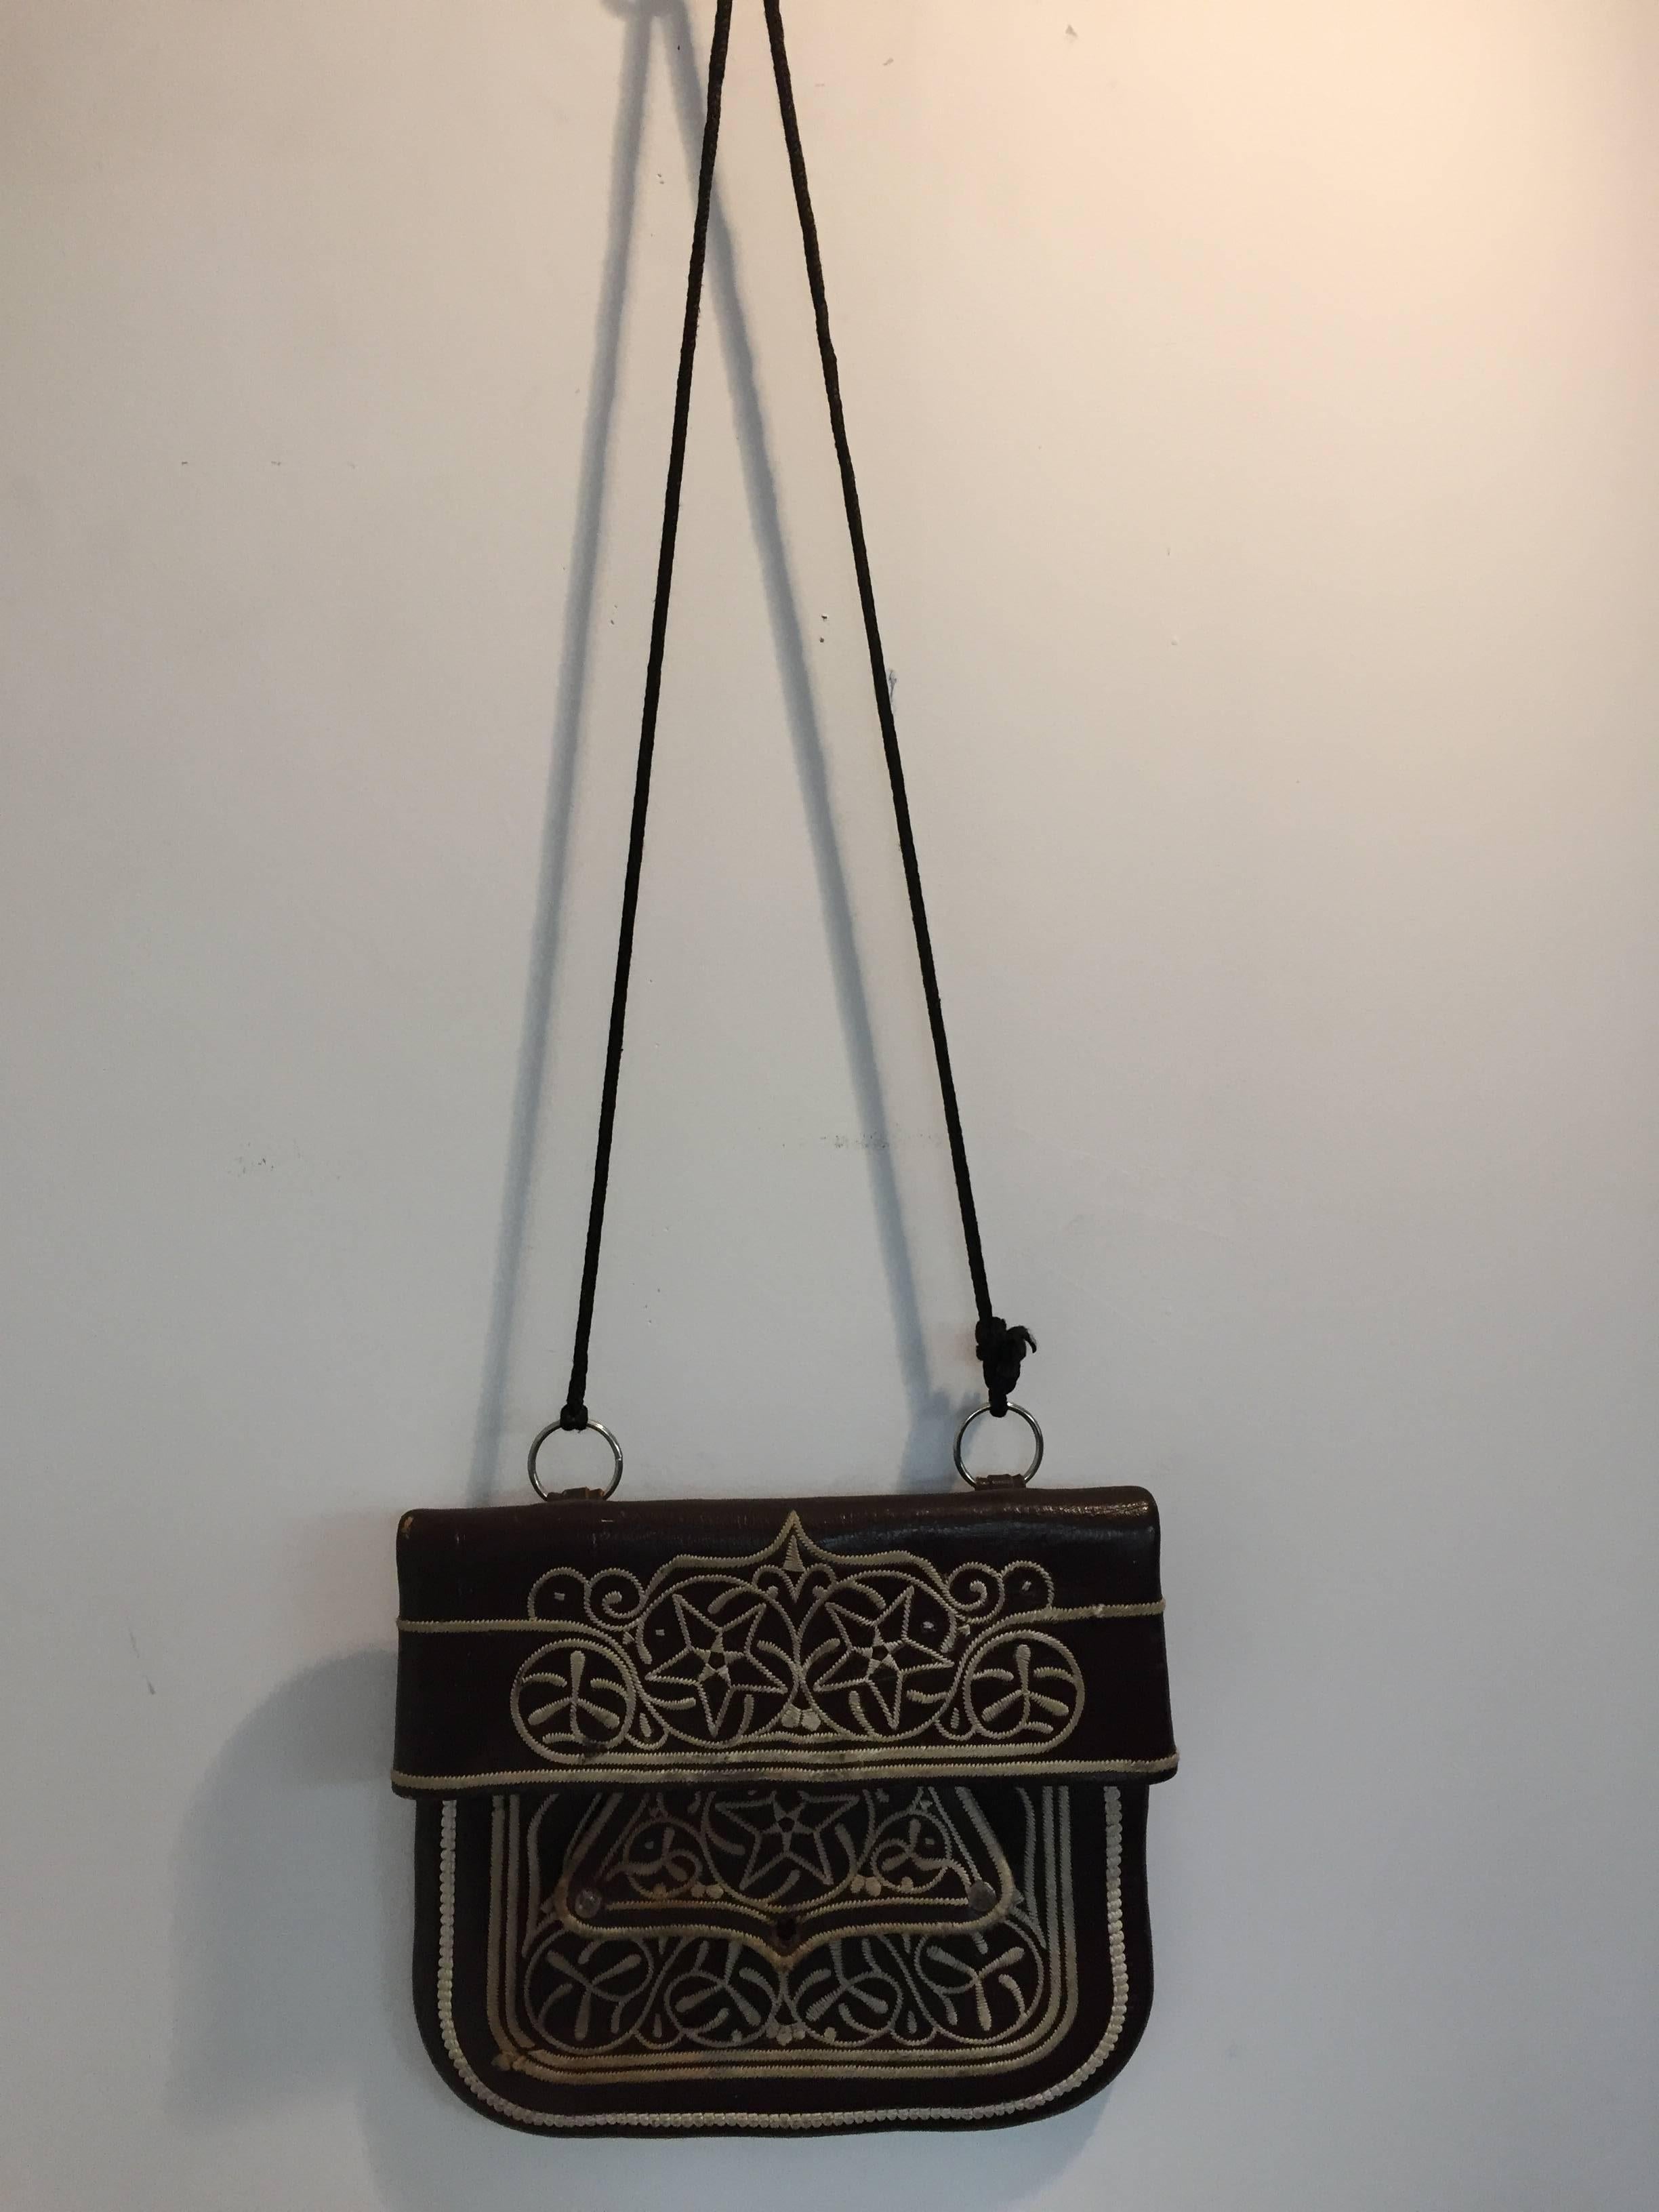 vintage ethnic Berber hand tooled and embroidered
leather satchel shoulder cross body bag.
Handcrafted by the Berber artisans from the Rif Mountains in North Morocco Africa. 
Great Moroccan ethnic collectible folk art.